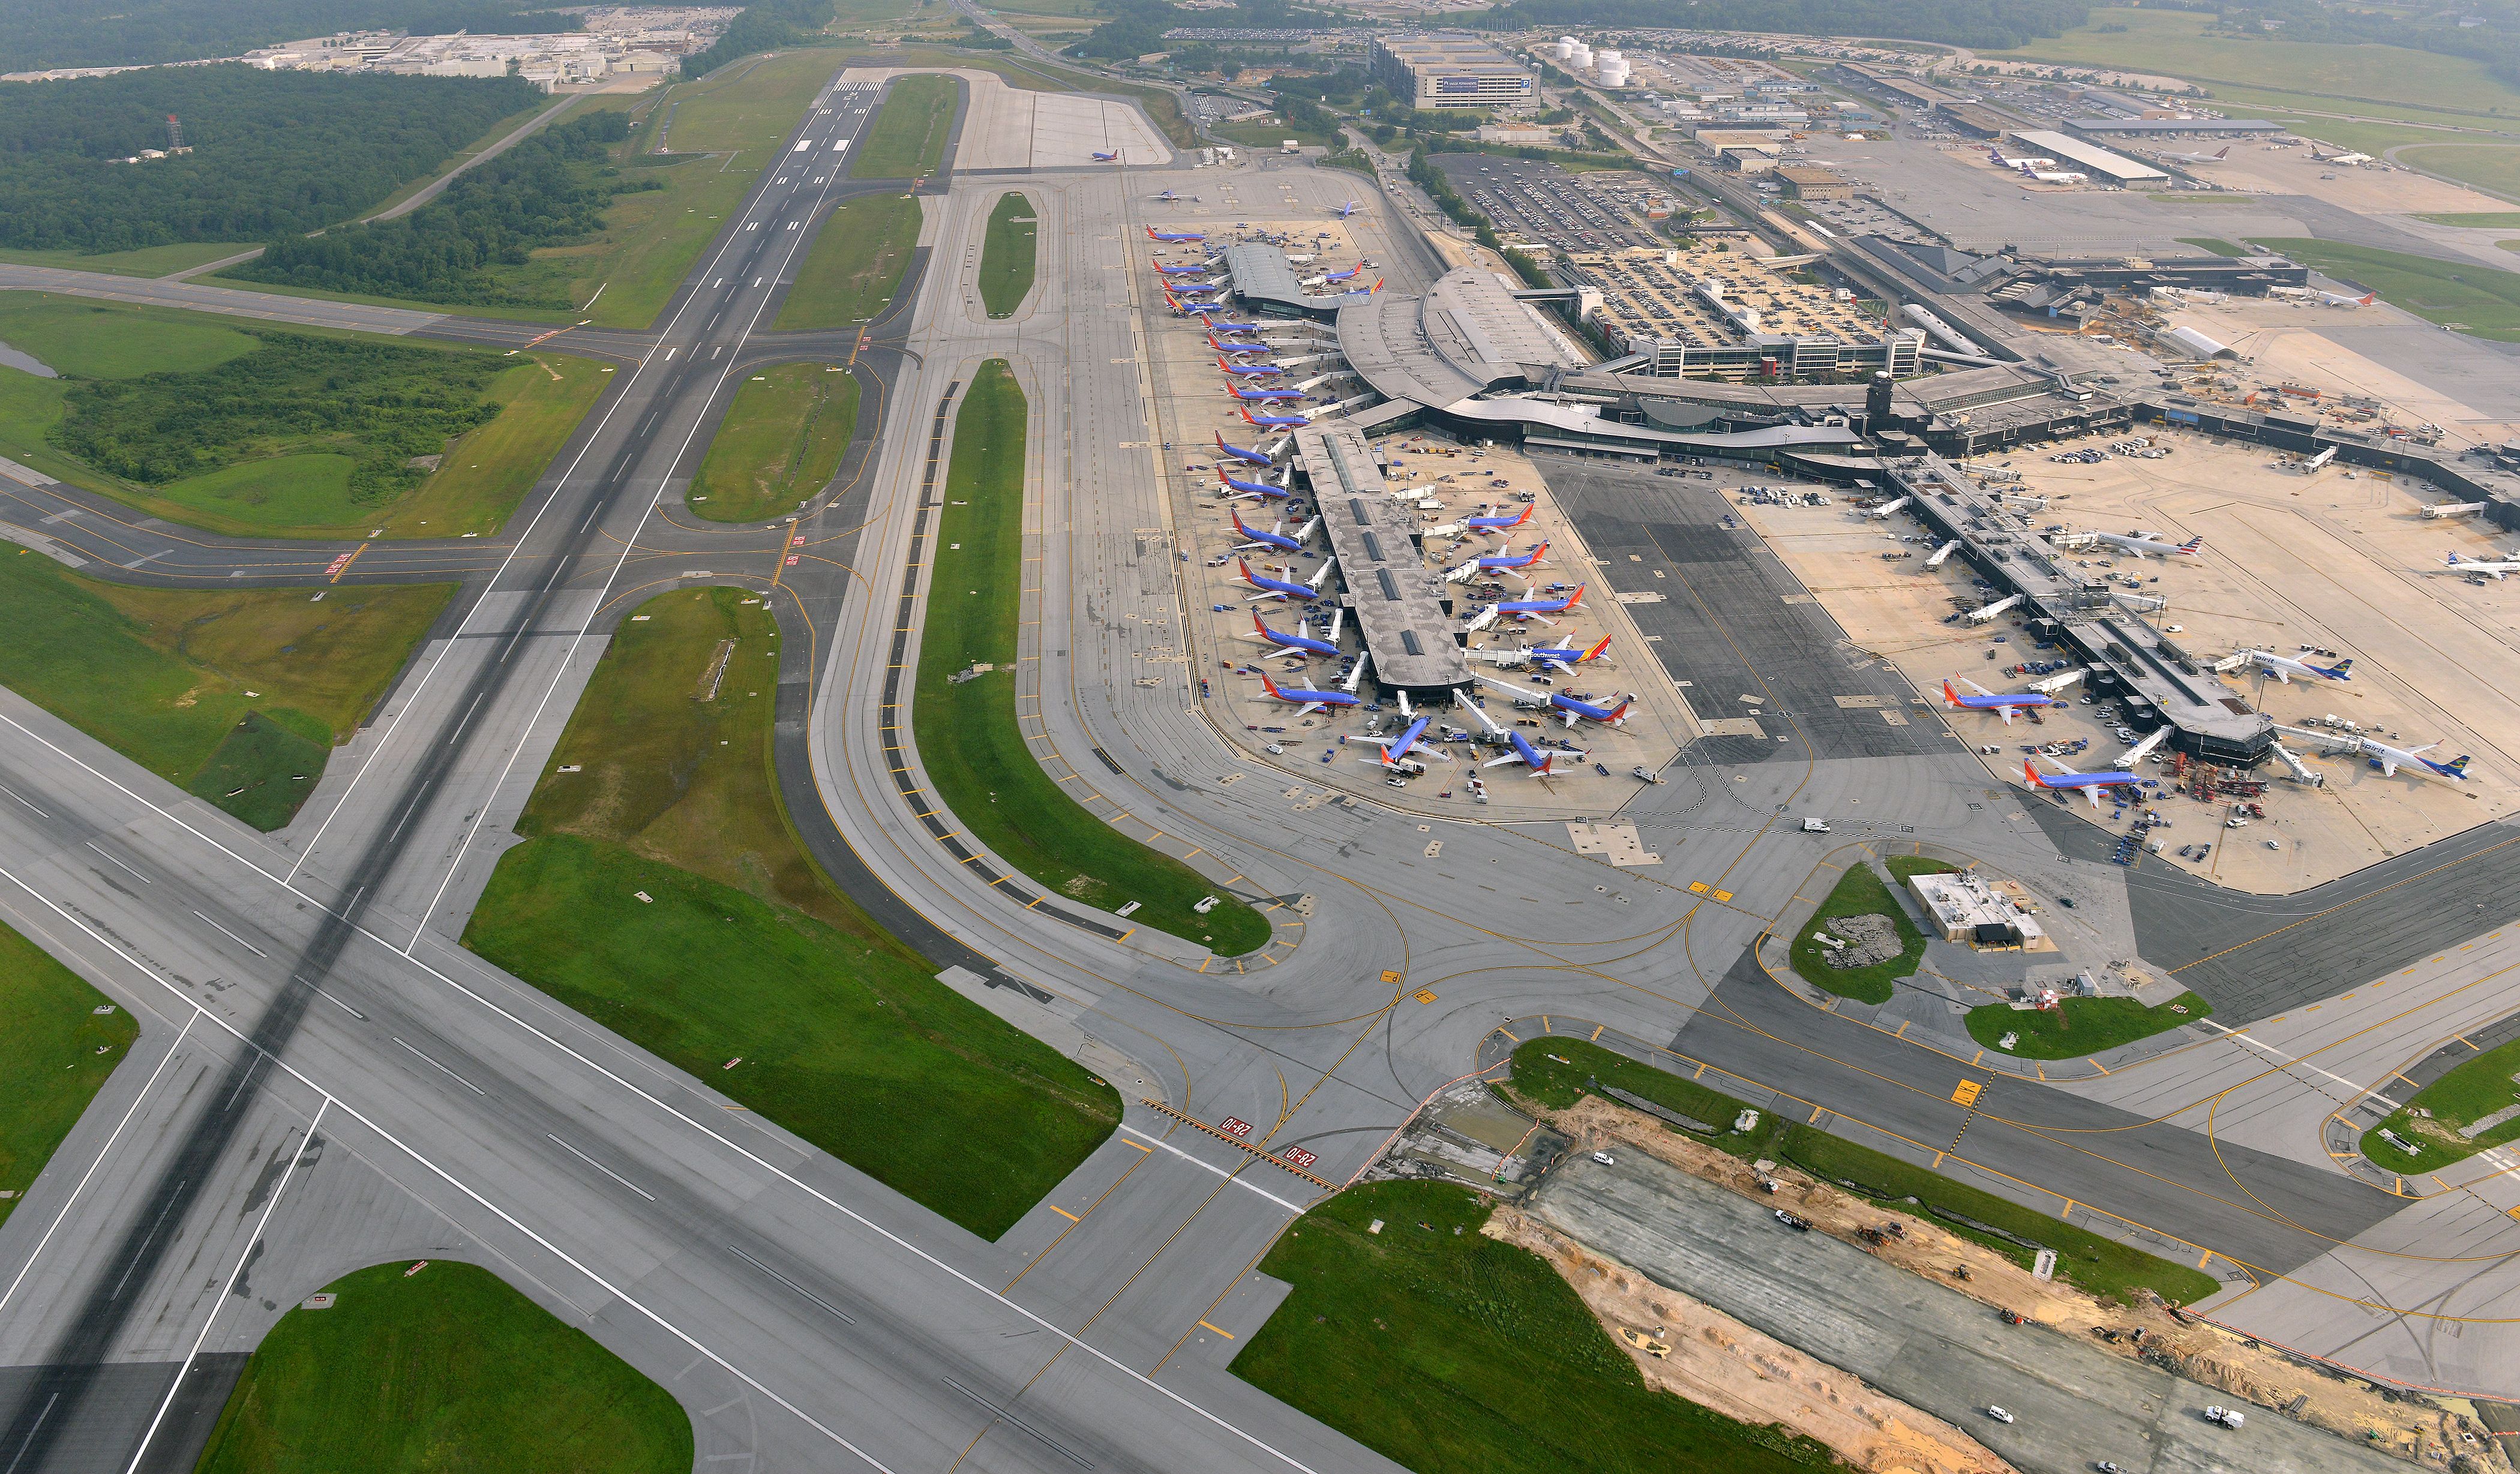 Aerial view of Baltimore Washington International Airport shows taxiway improvements underway to improve safety and reduce congestion, as of June 27, 2015.